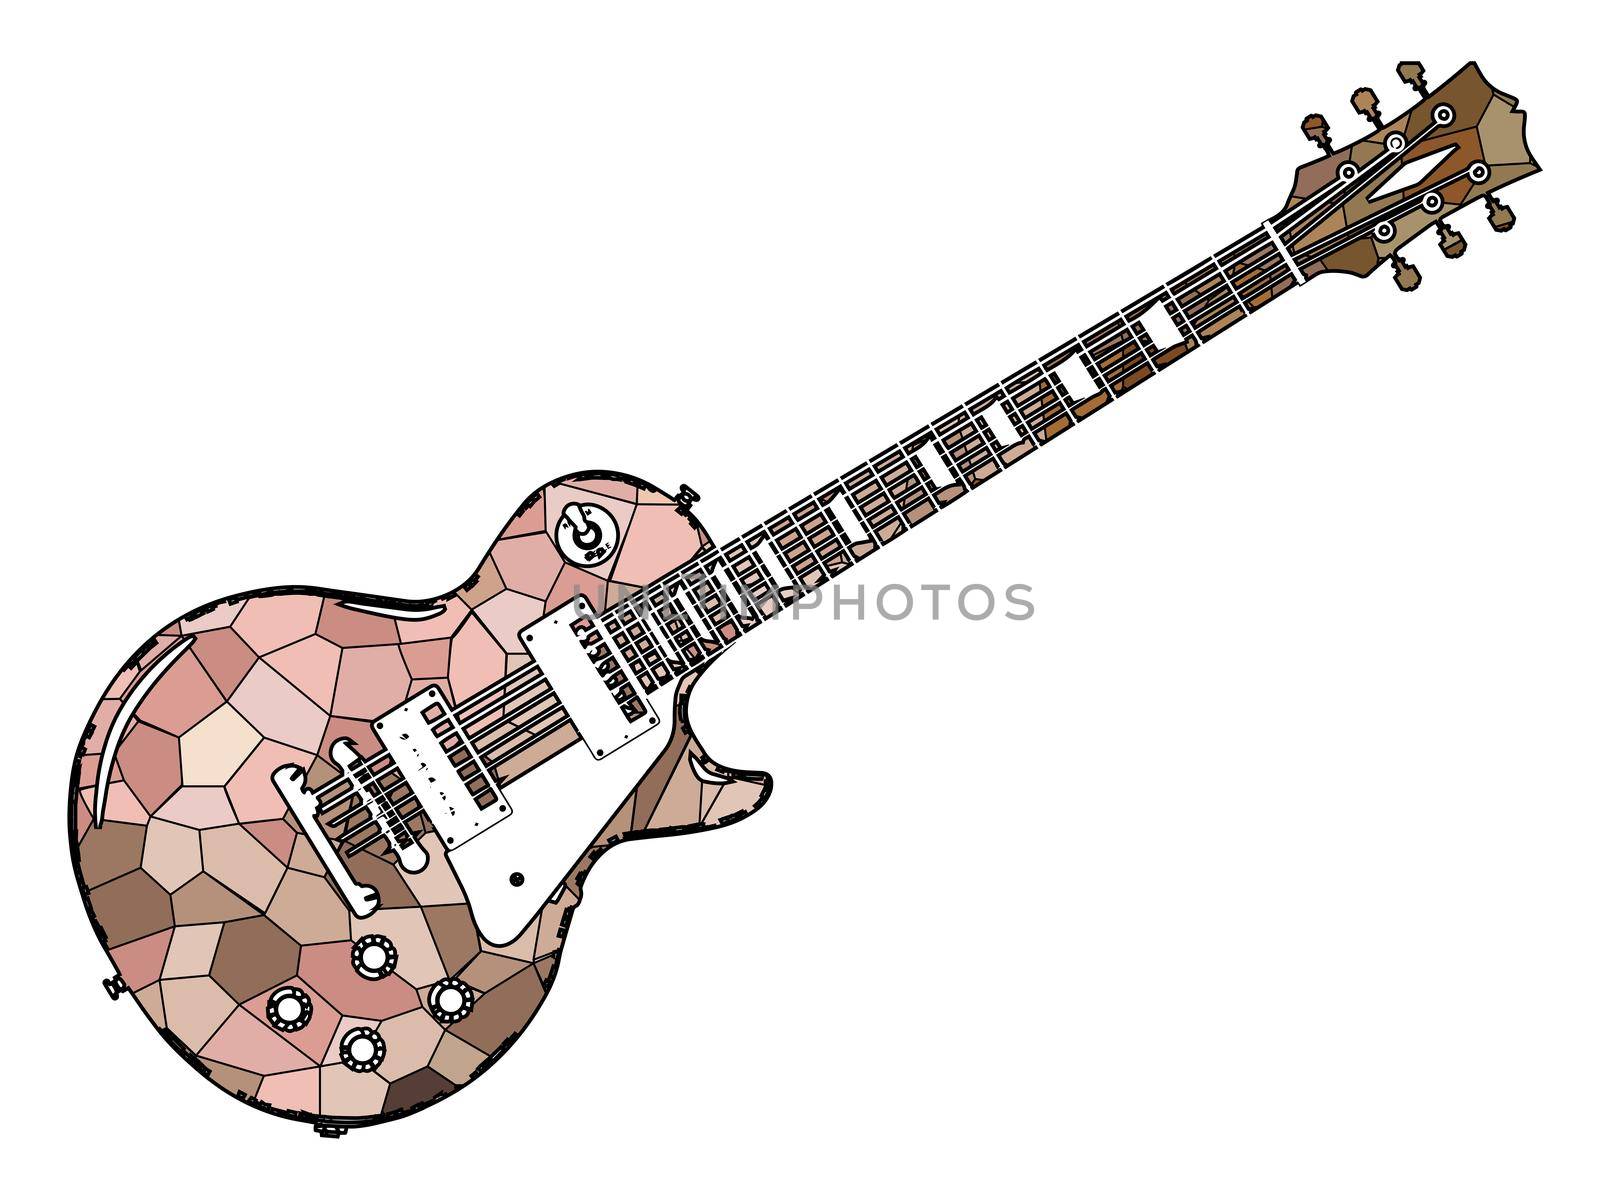 A classic red electric solid body guitar isolated on a white background